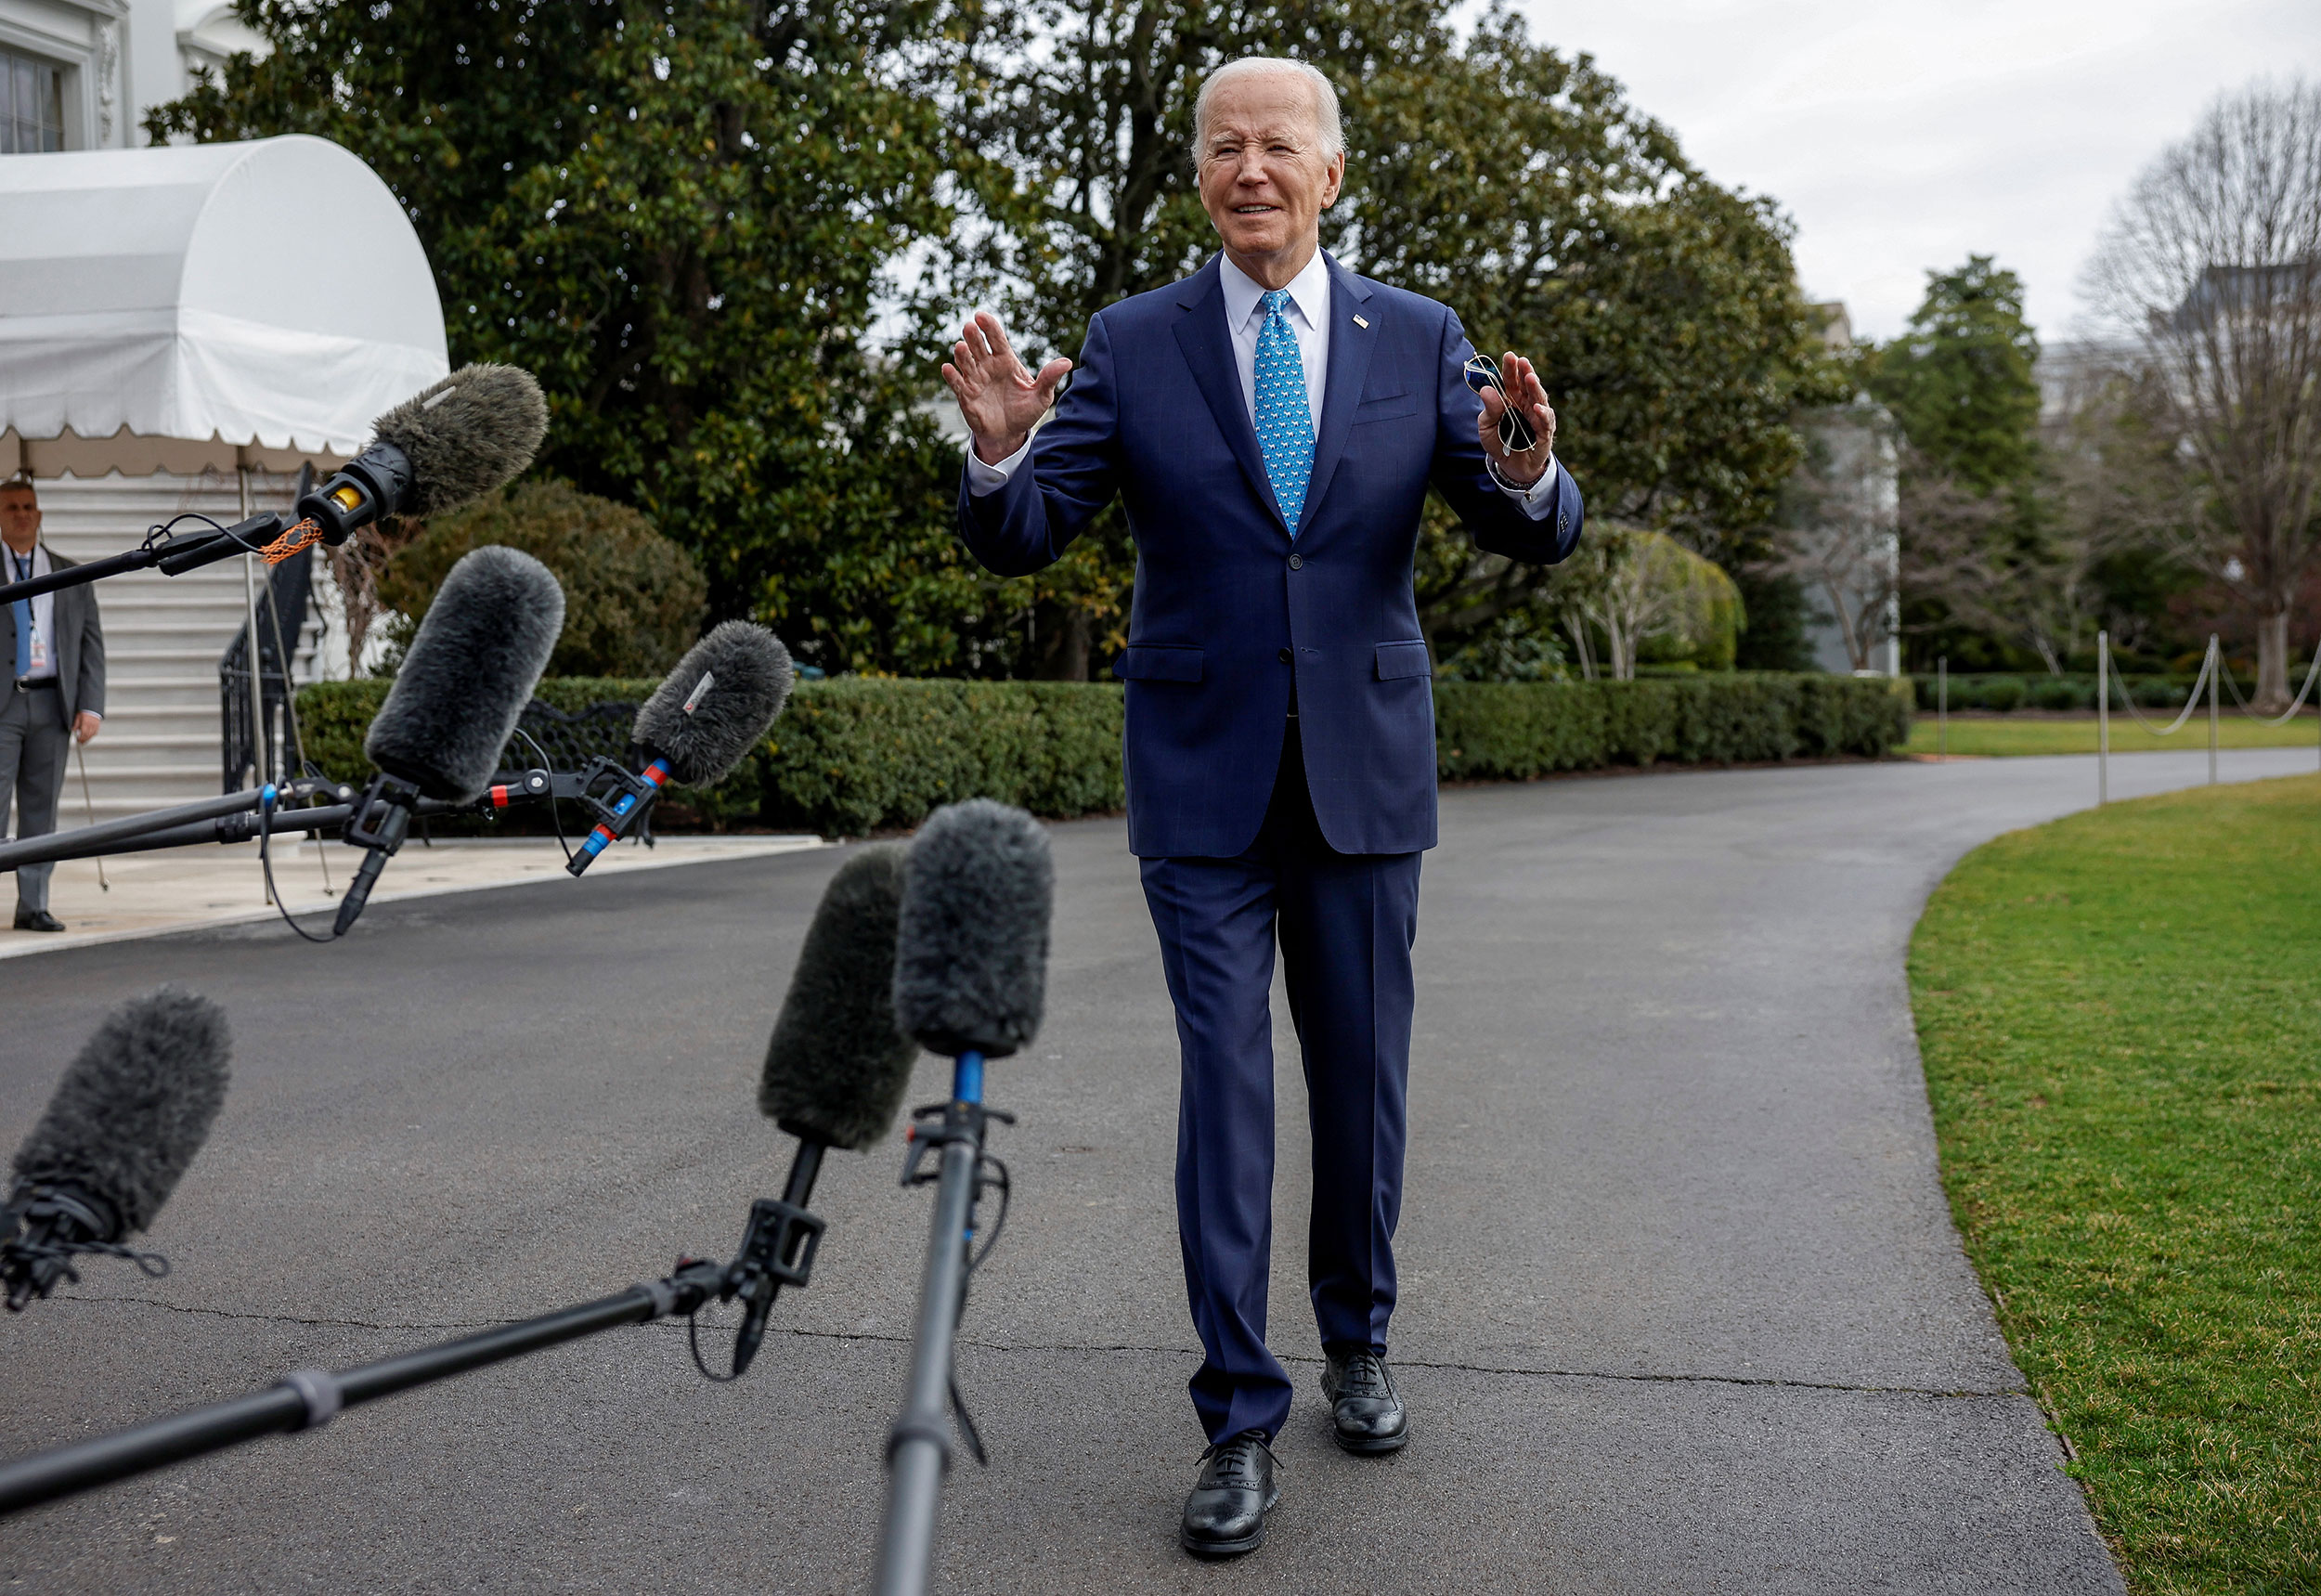 US President Joe Biden speaks to members of the media before departing from the White House in Washington, DC, on January 30.